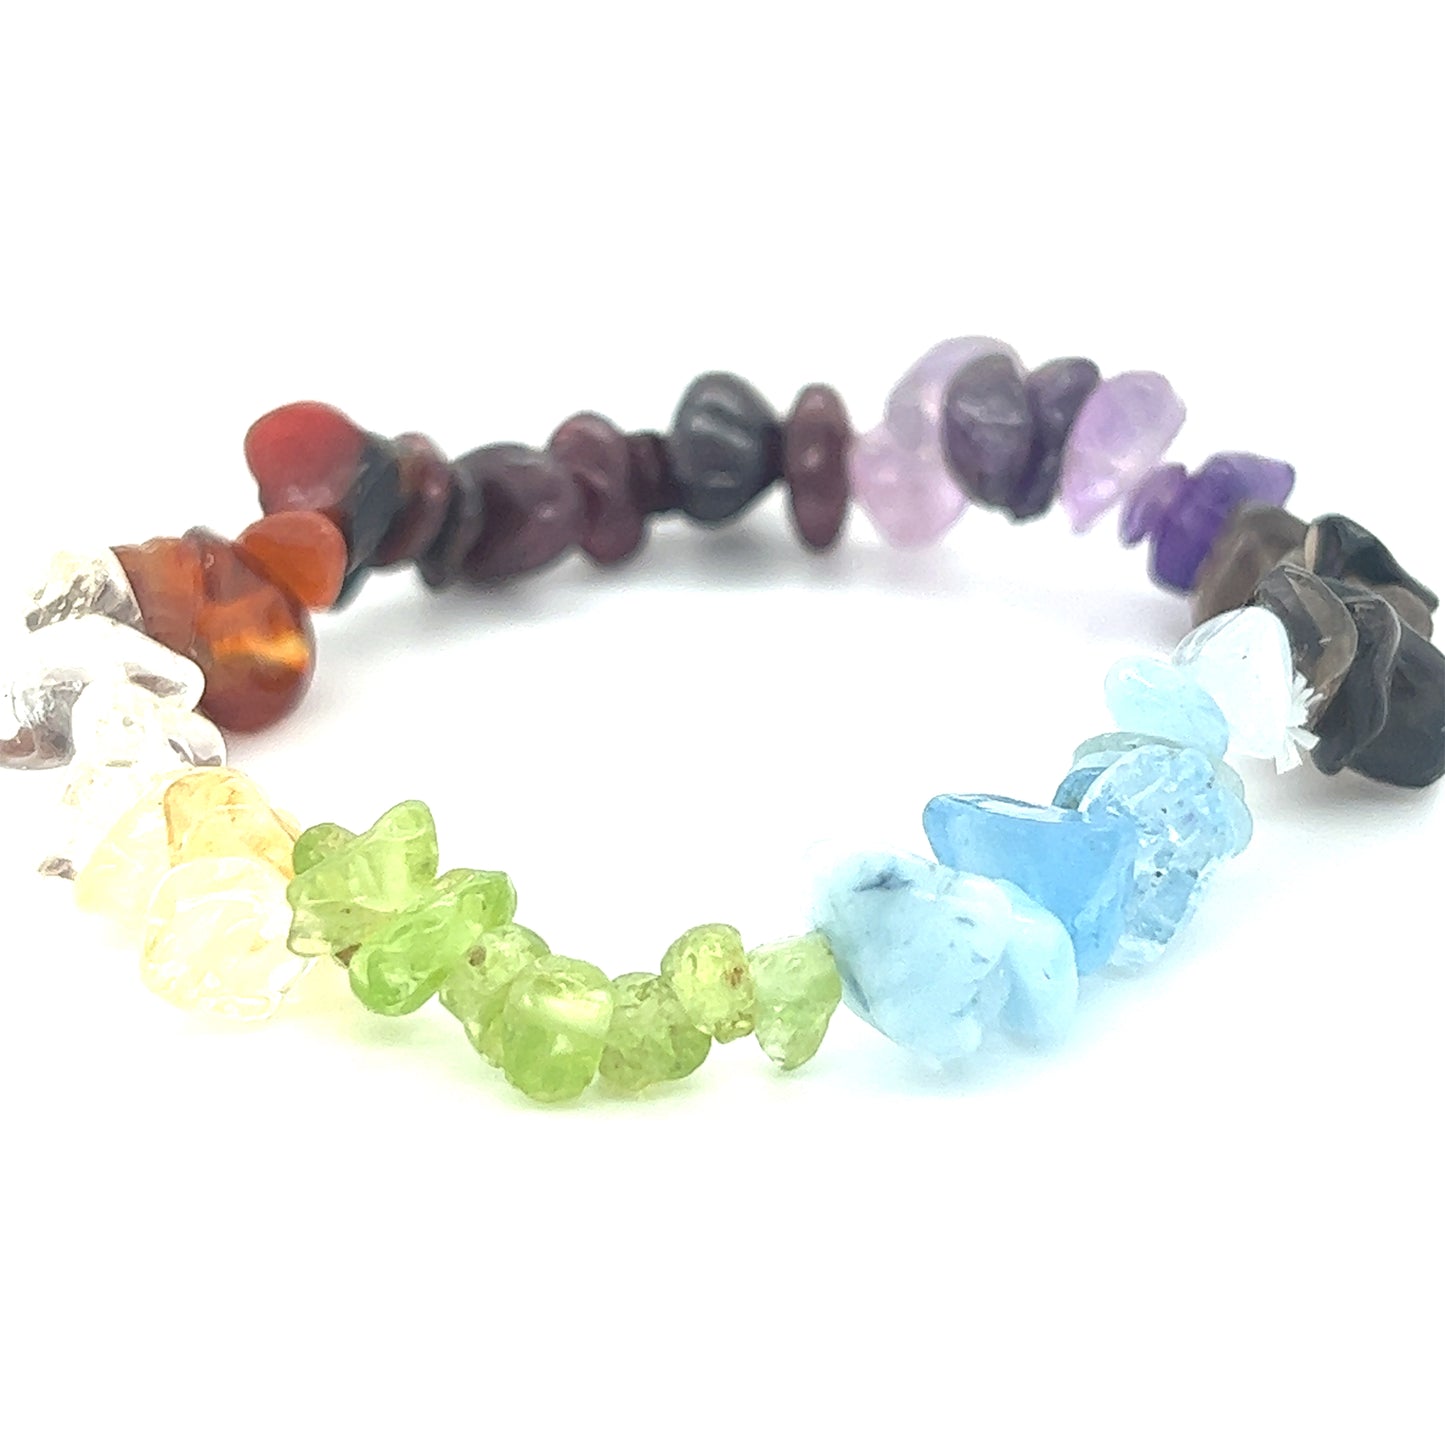 This Chakra Stone Chip Bracelet from Super Silver radiates healing energy, promoting harmony with its array of different colored stones.